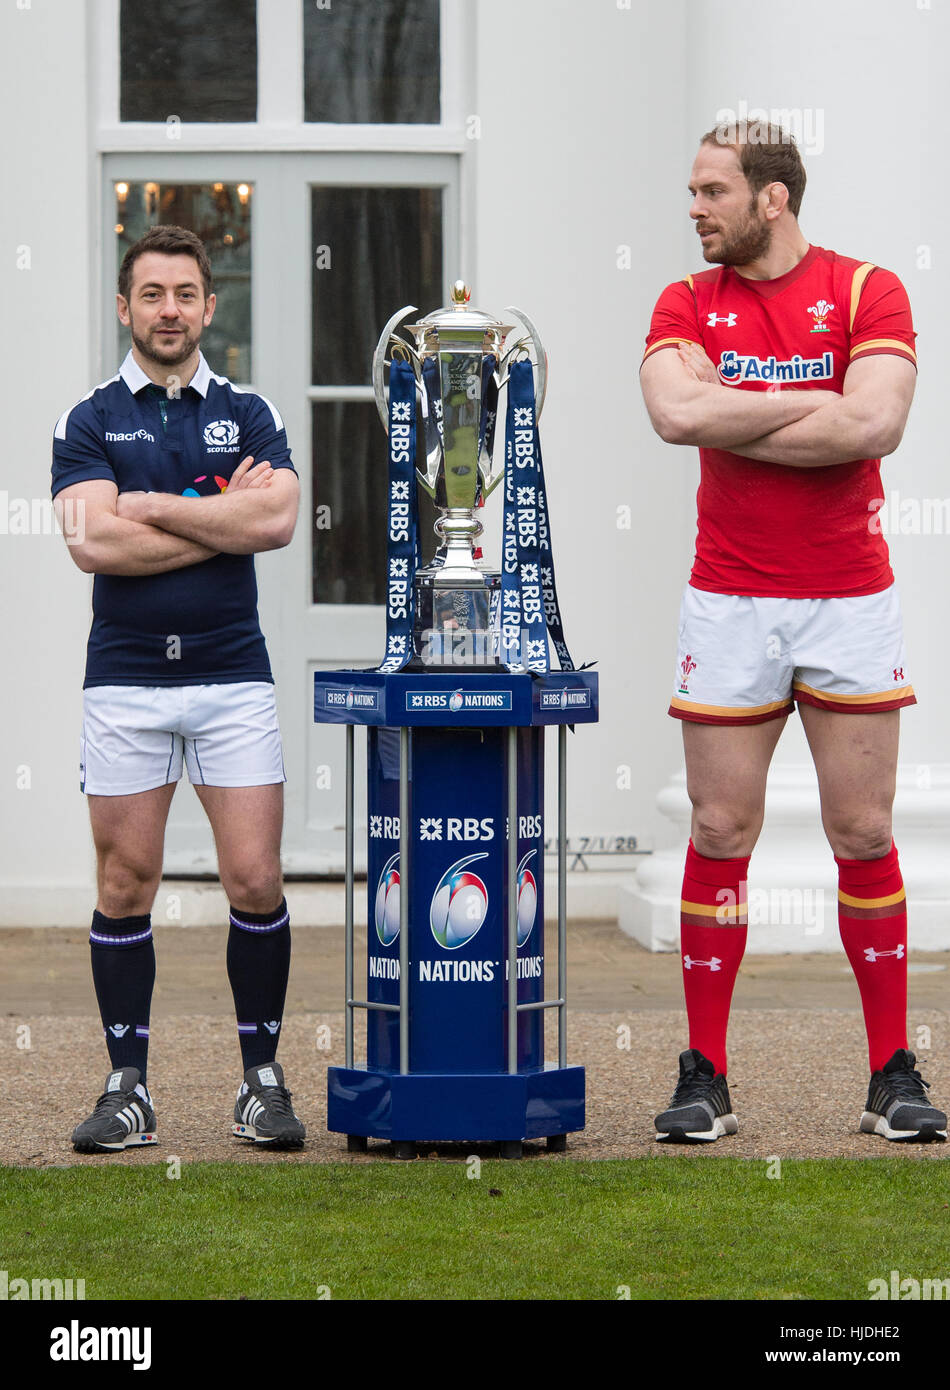 London, UK. 25th January 2017. Greig Laidlaw and Alun Wynne Jones with the 6 Nations trophy at the launch of the RBS 6 Nations Championship at the Hurlingham Club London Credit: Alan D West/Alamy Live News Stock Photo